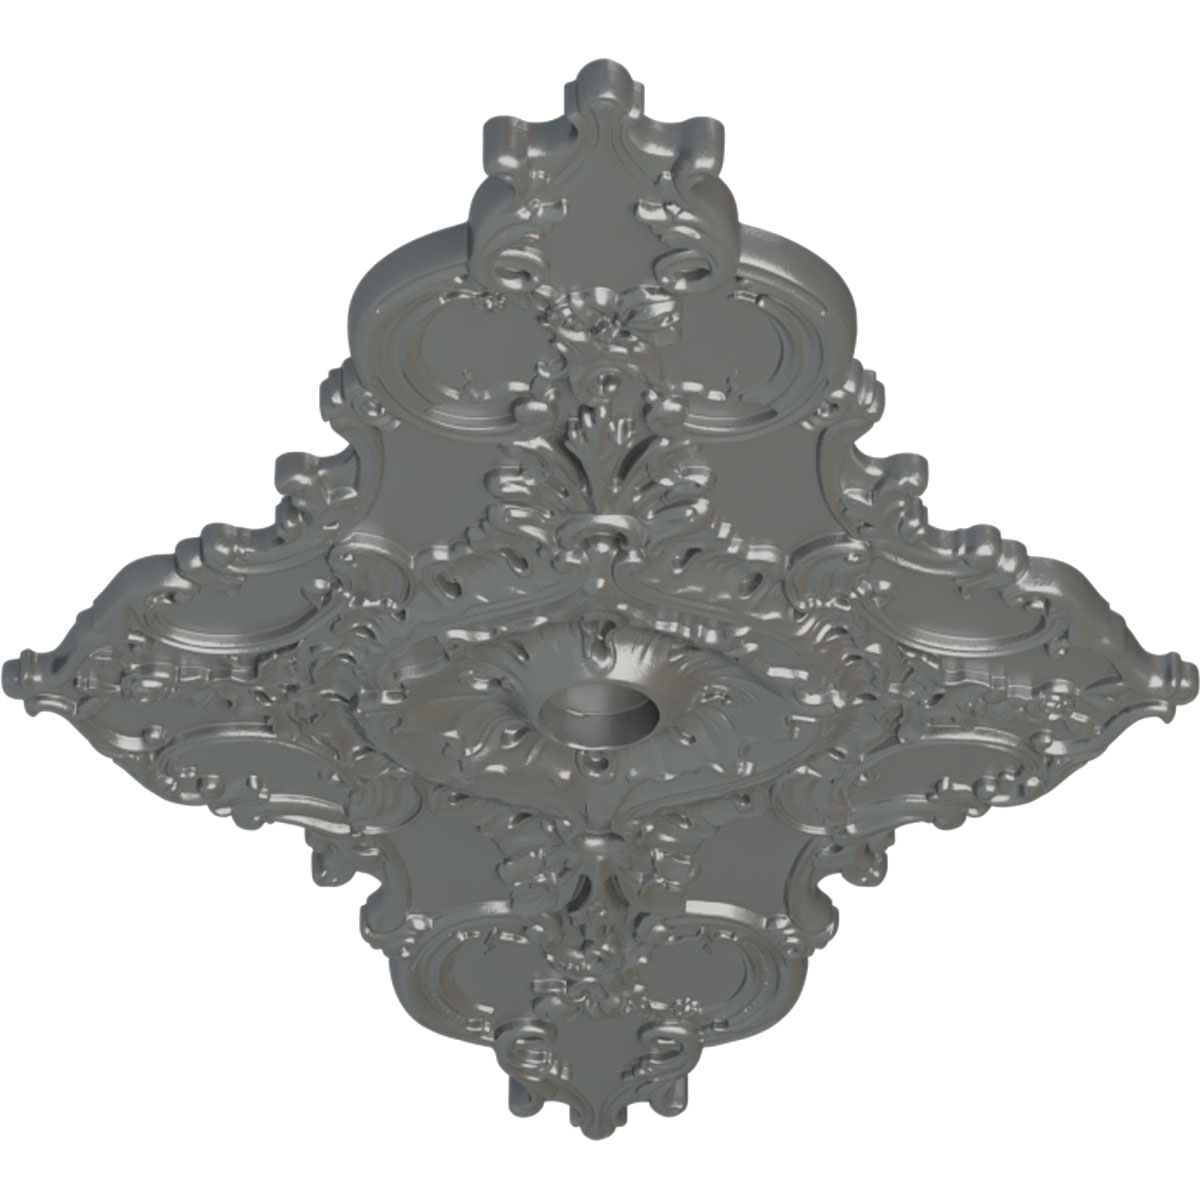 67 1/4"W x 43 3/8"H x 4"ID x 2"P Melchor Diamond Ceiling Medallion (Fits Canopies up to 4"), Hand-Painted Silver - image 2 of 4